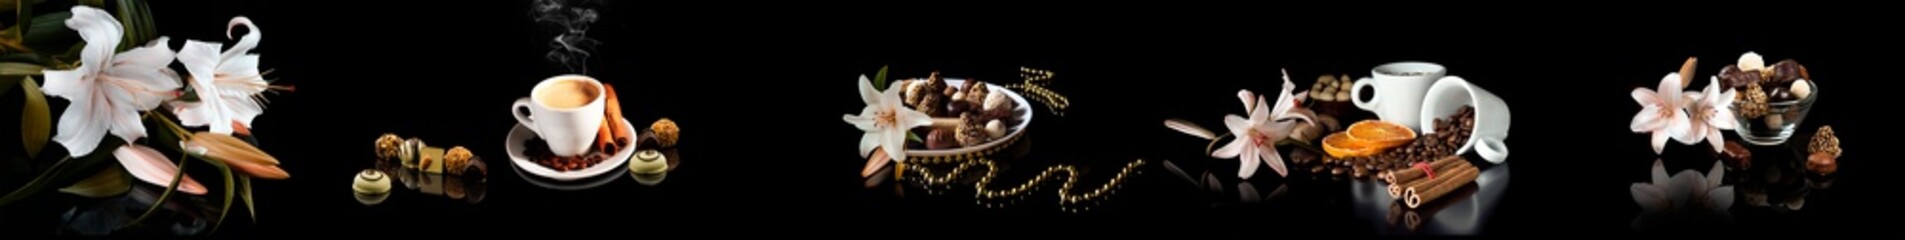 Chocolate candies with lily flowers on a dark background